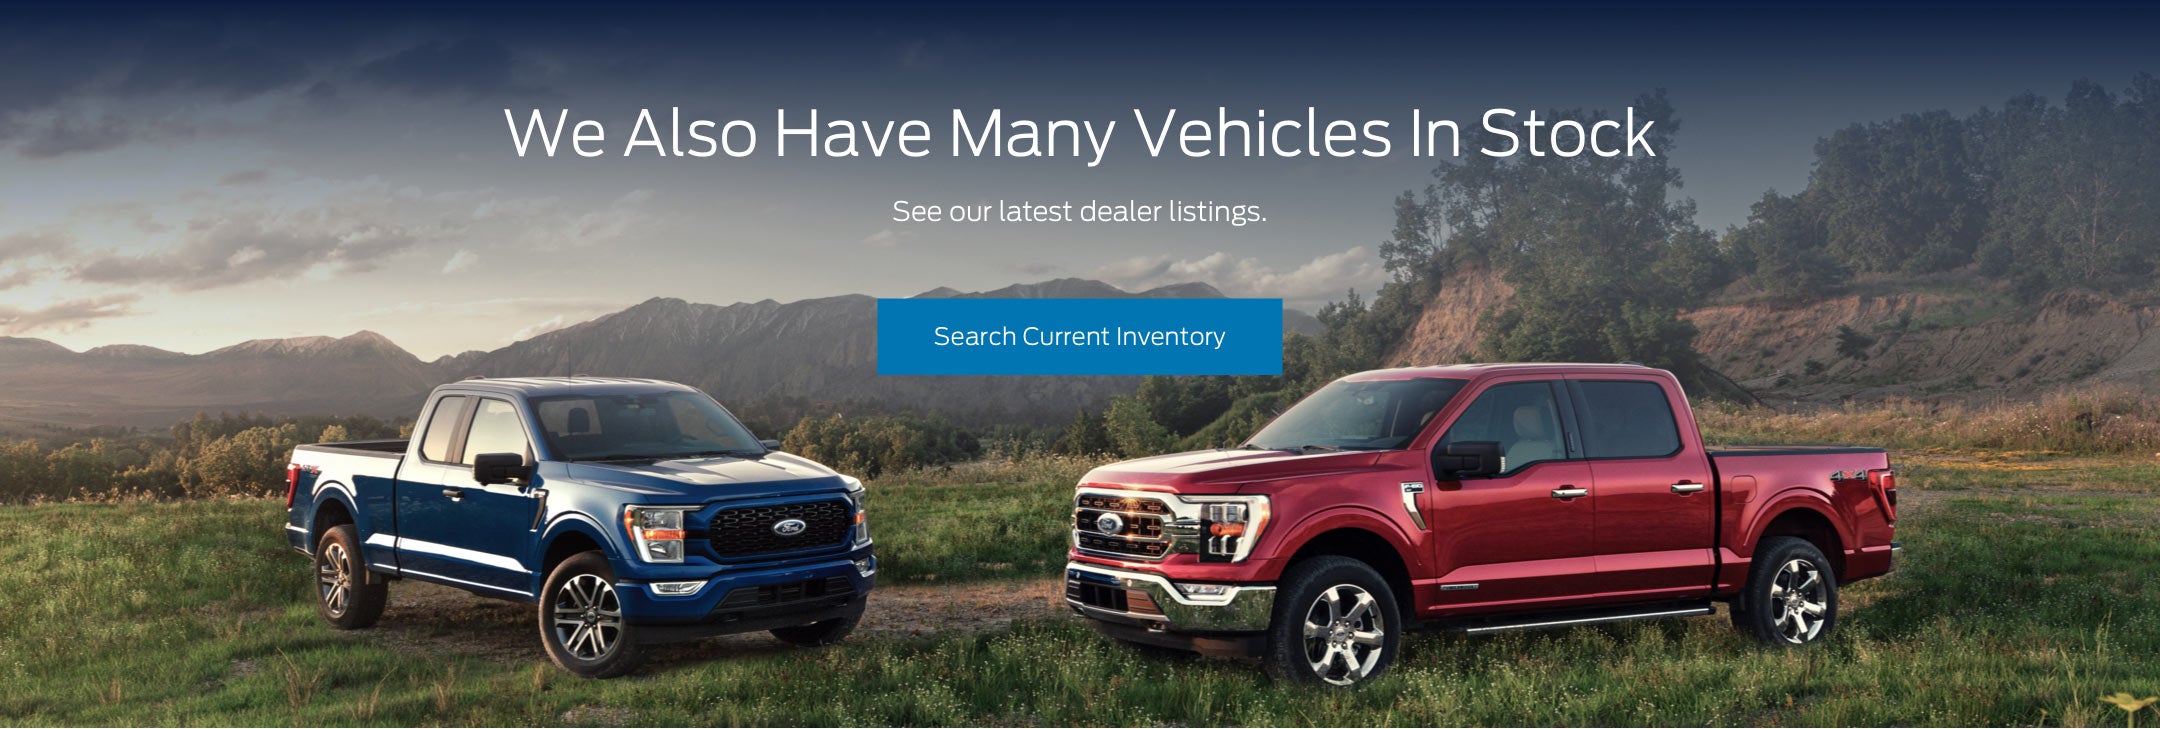 Ford vehicles in stock | Tri-City Ford Inc in Eden NC